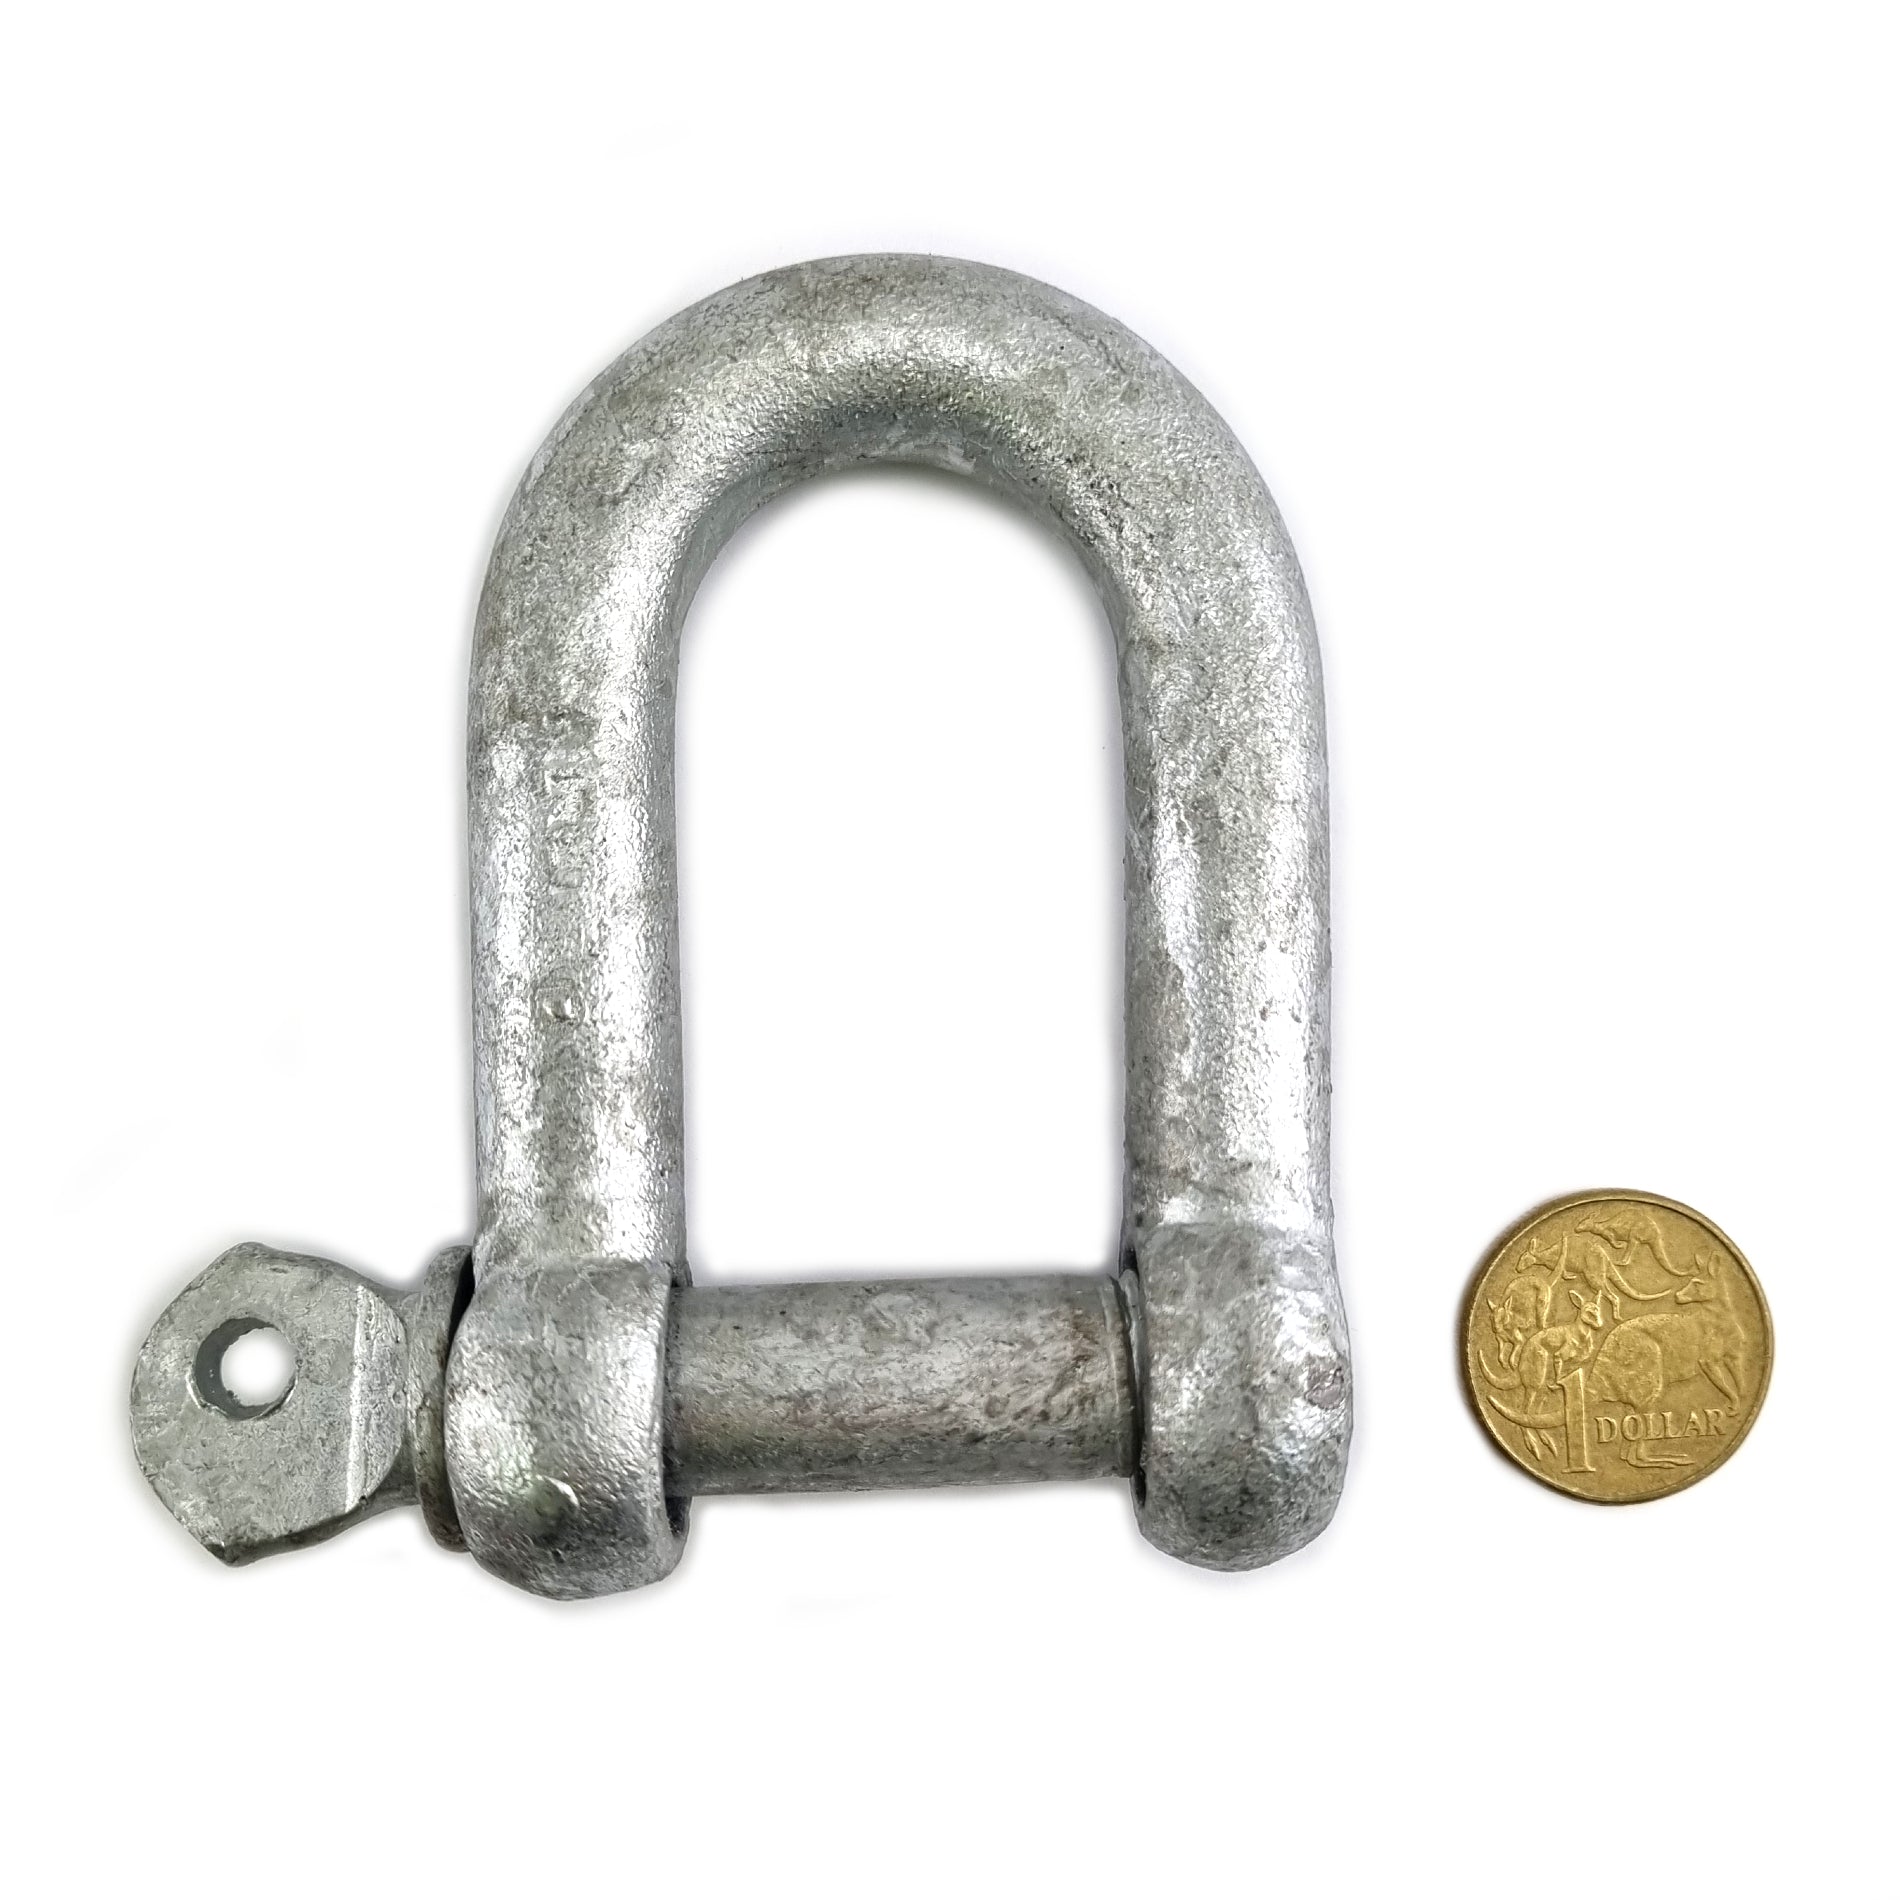 16mm Galvanised D Shackle. Shop D-Shackles and Hardware online at factory direct prices. Shipping Australia wide or Melbourne pick-up